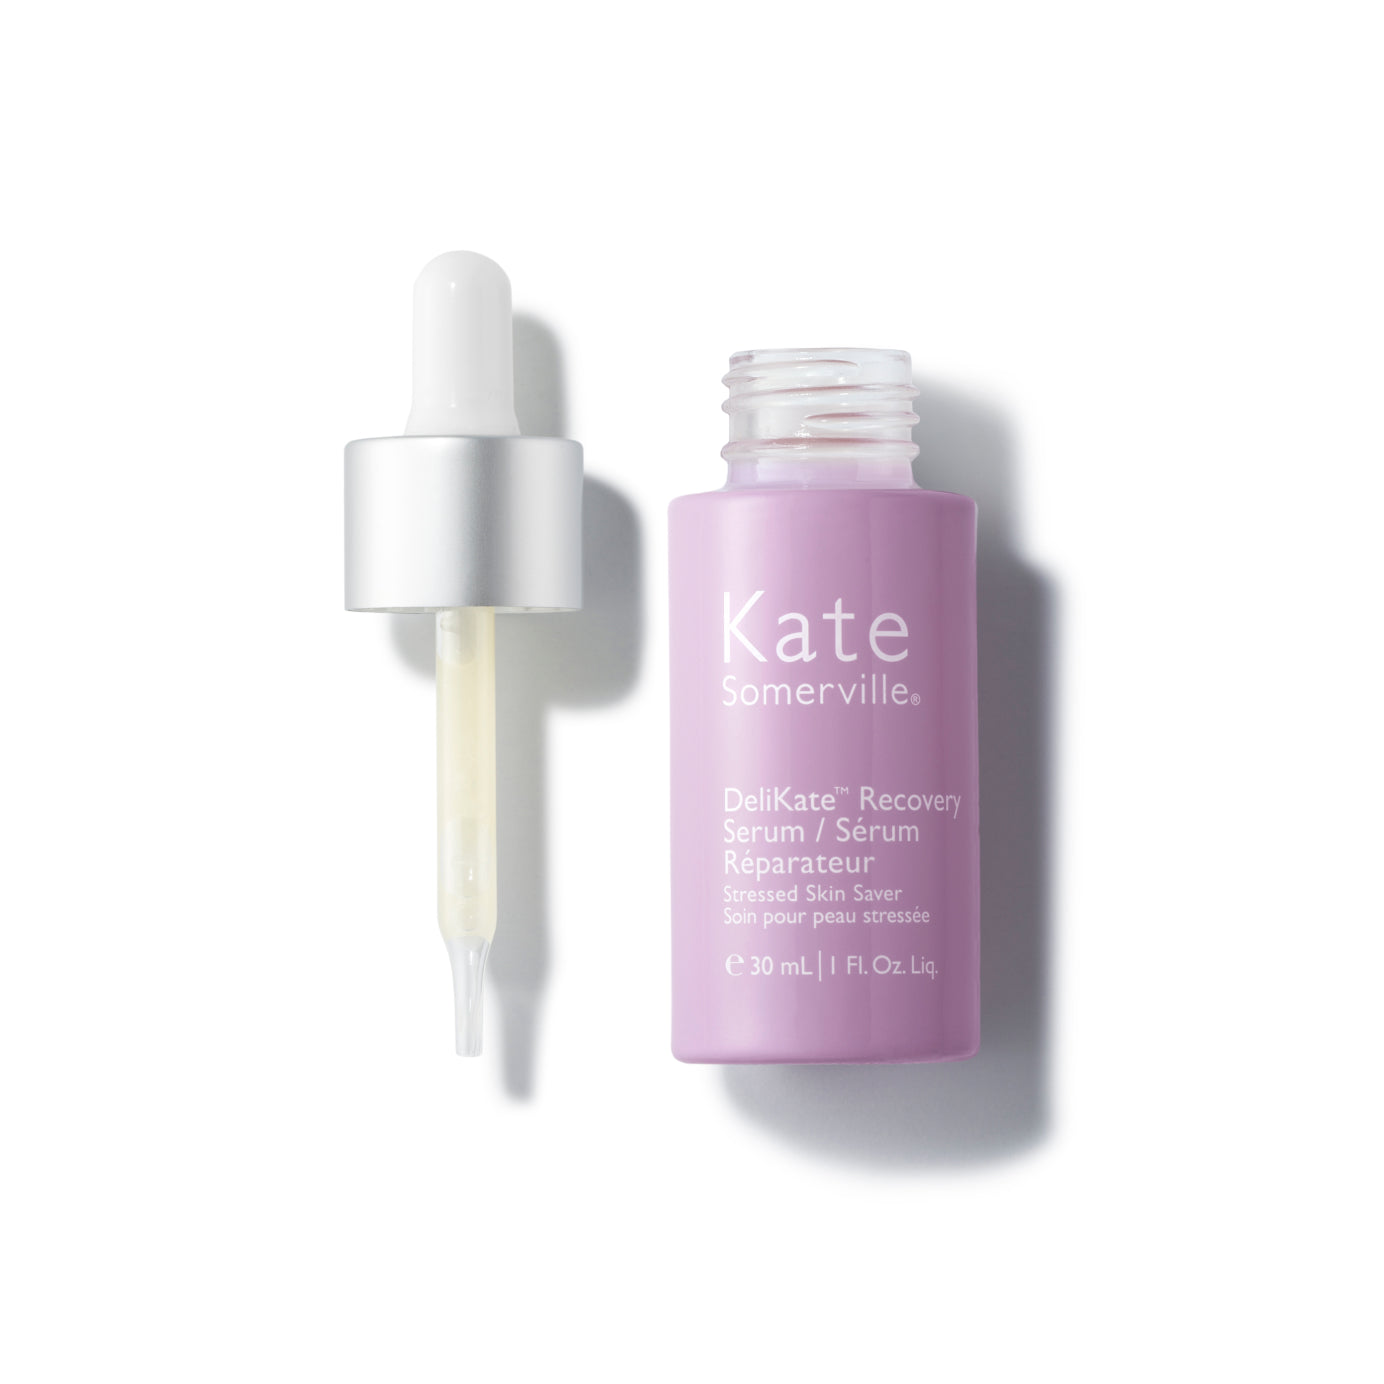 DeliKate® Recovery Serum